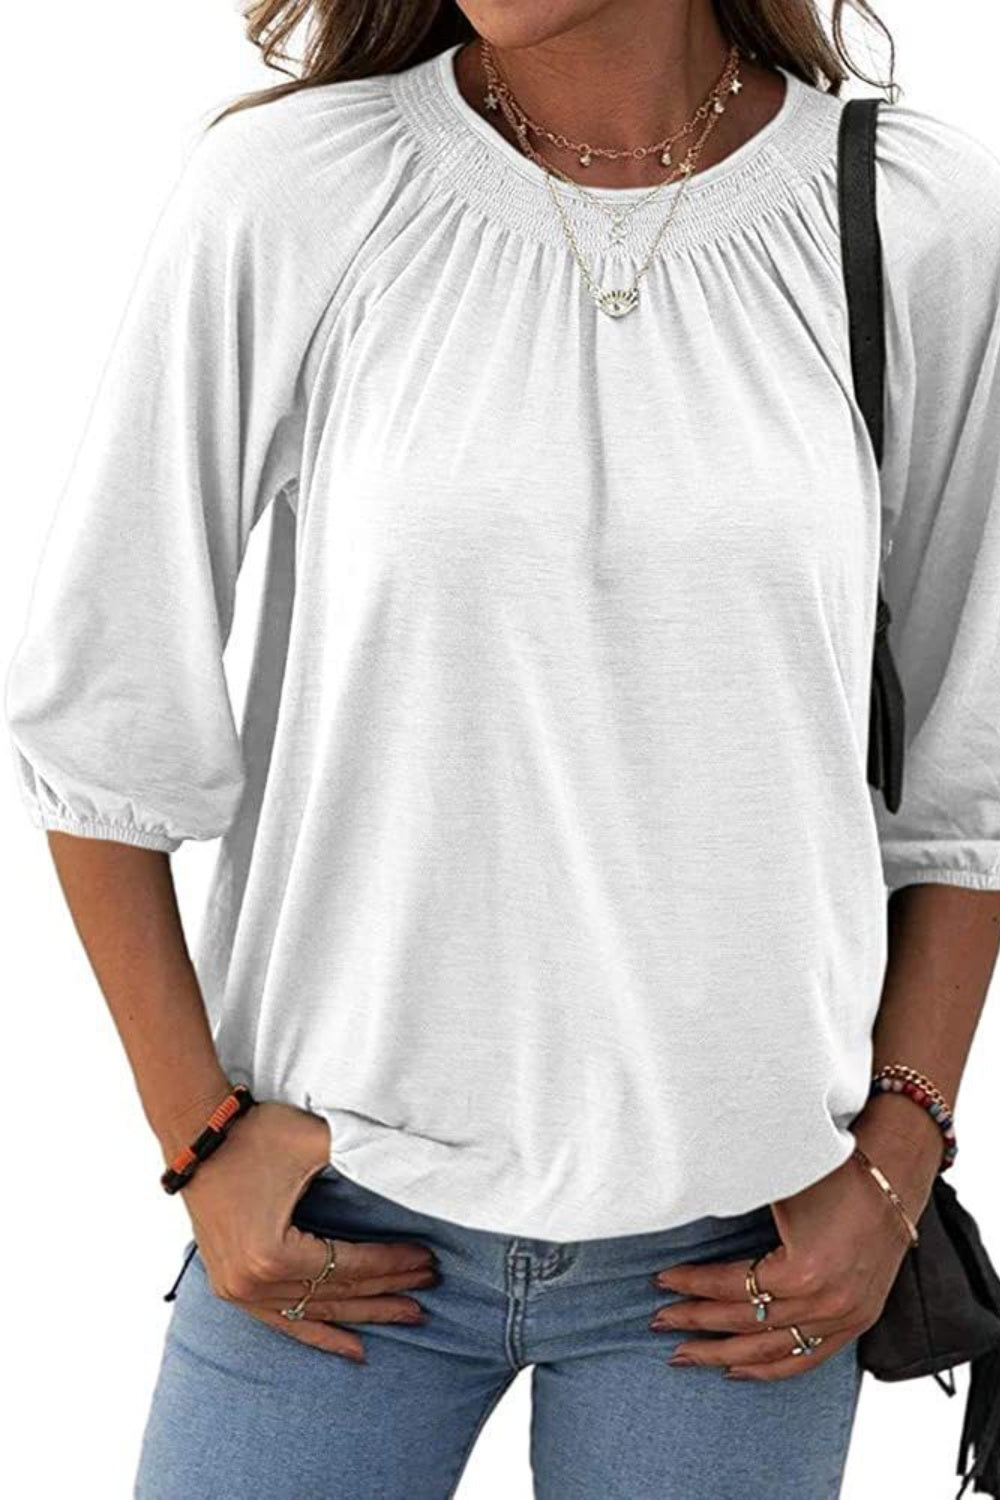 Gathered Detail Round Neck Top (8 Colors)  Krazy Heart Designs Boutique White S 